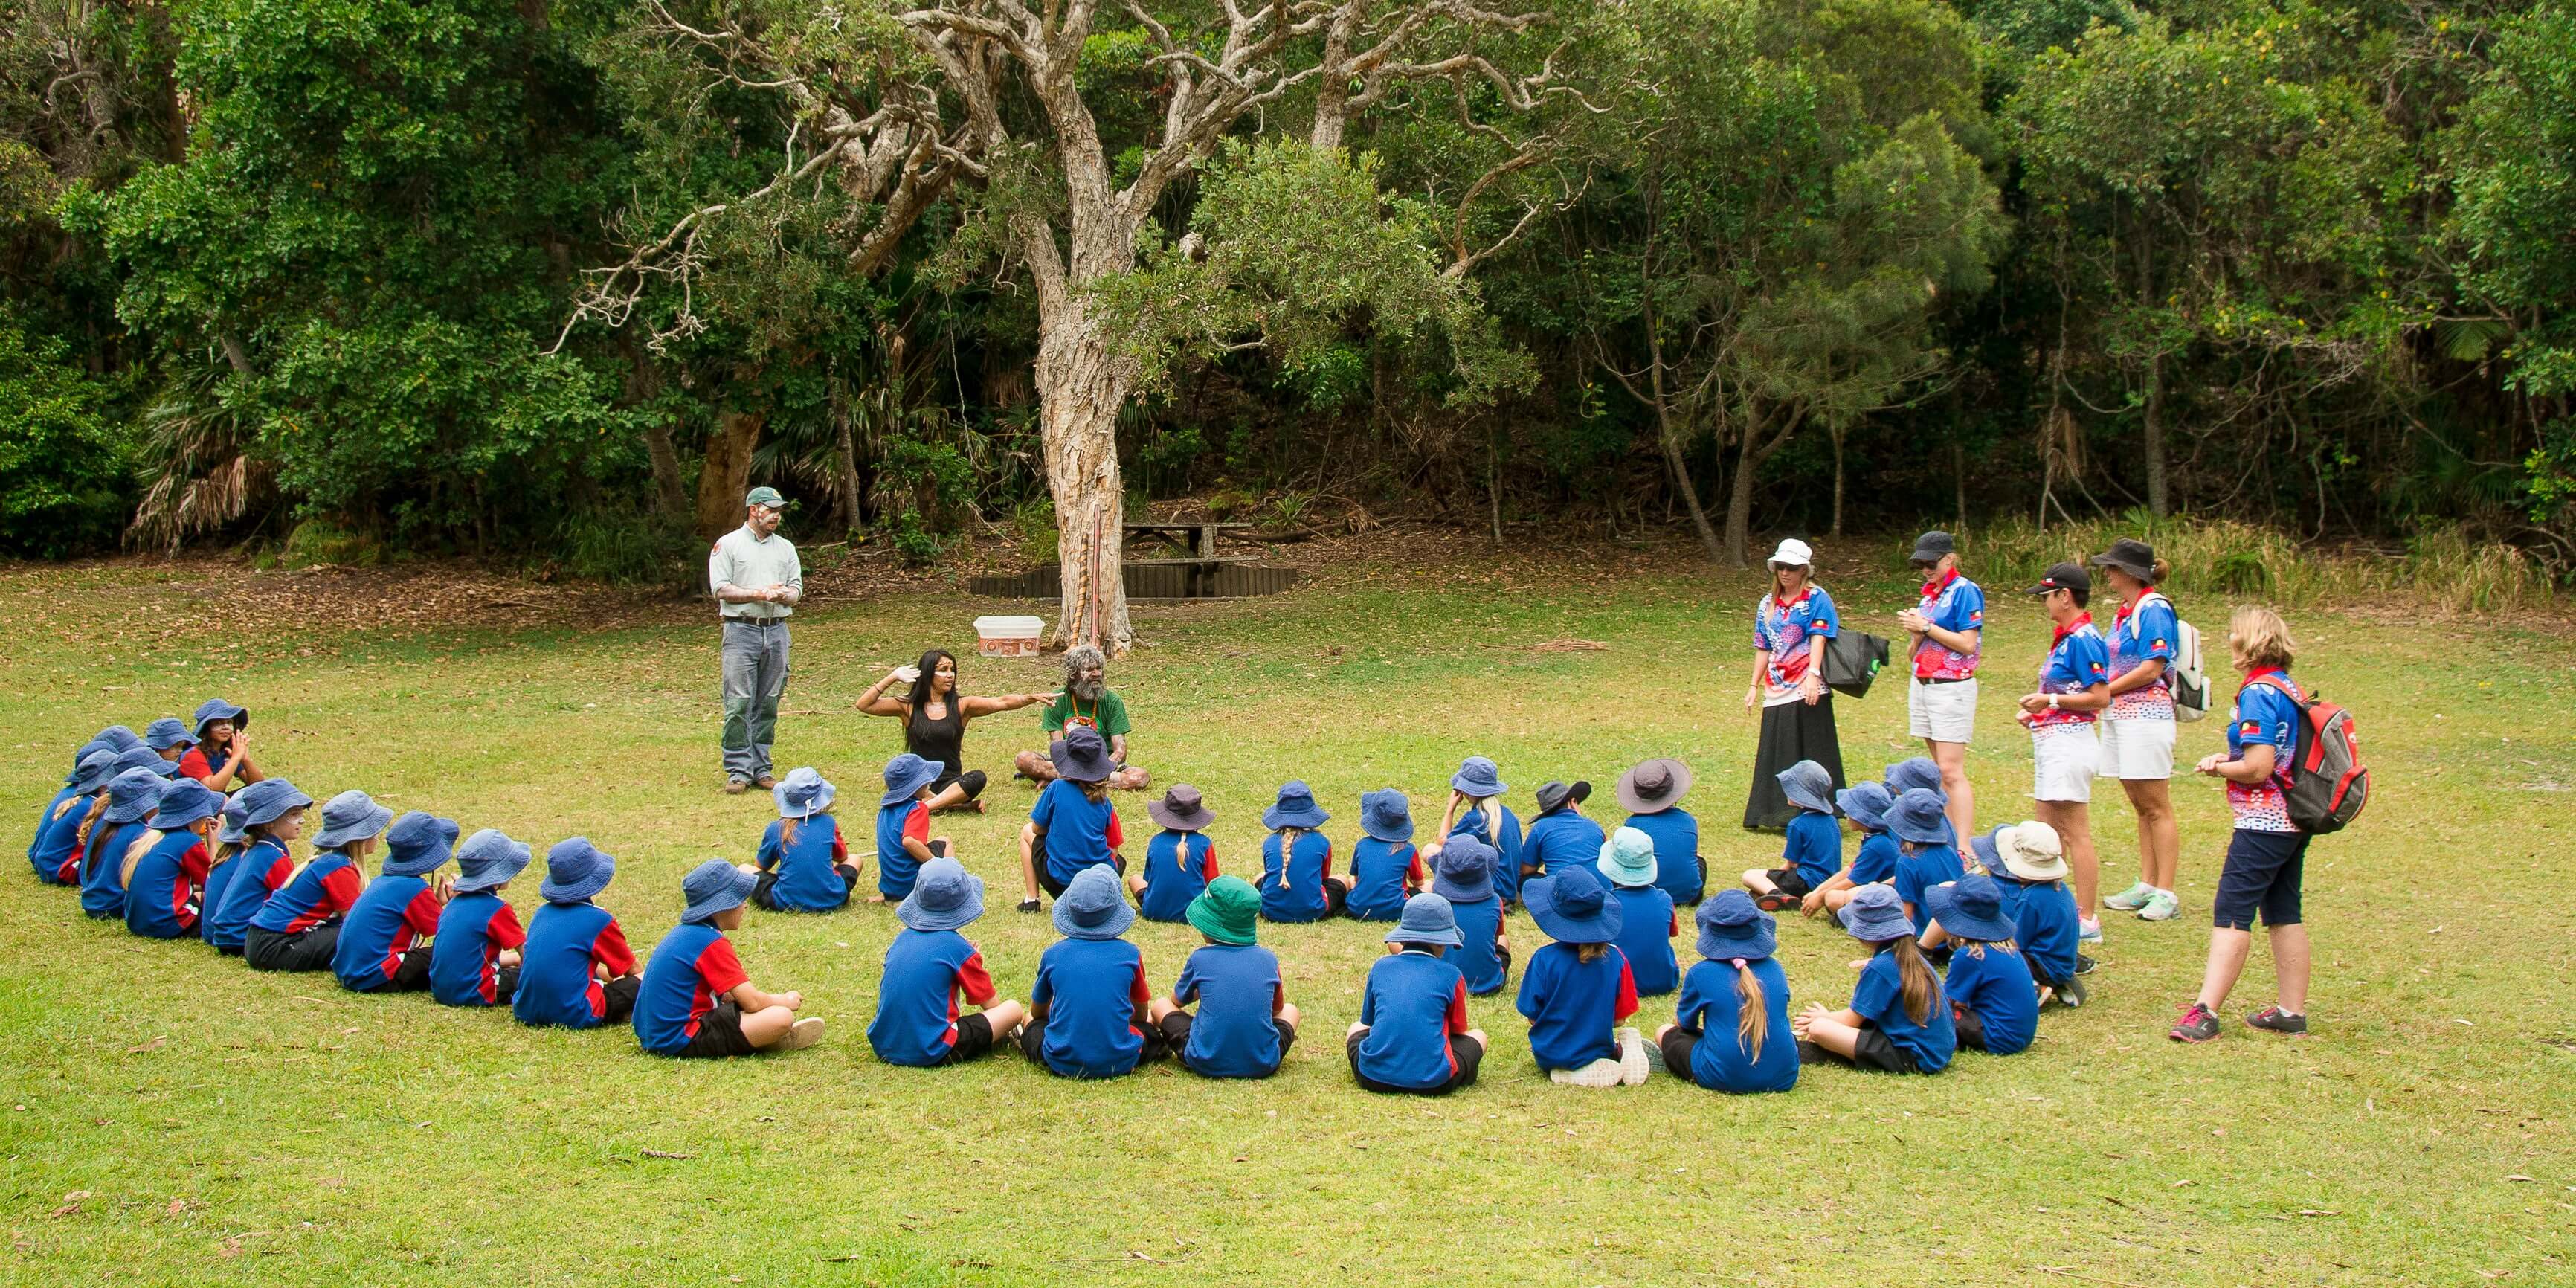 Group of school students seating on the grass listening to Aboriginal women. Image credit: David Young/DPIE